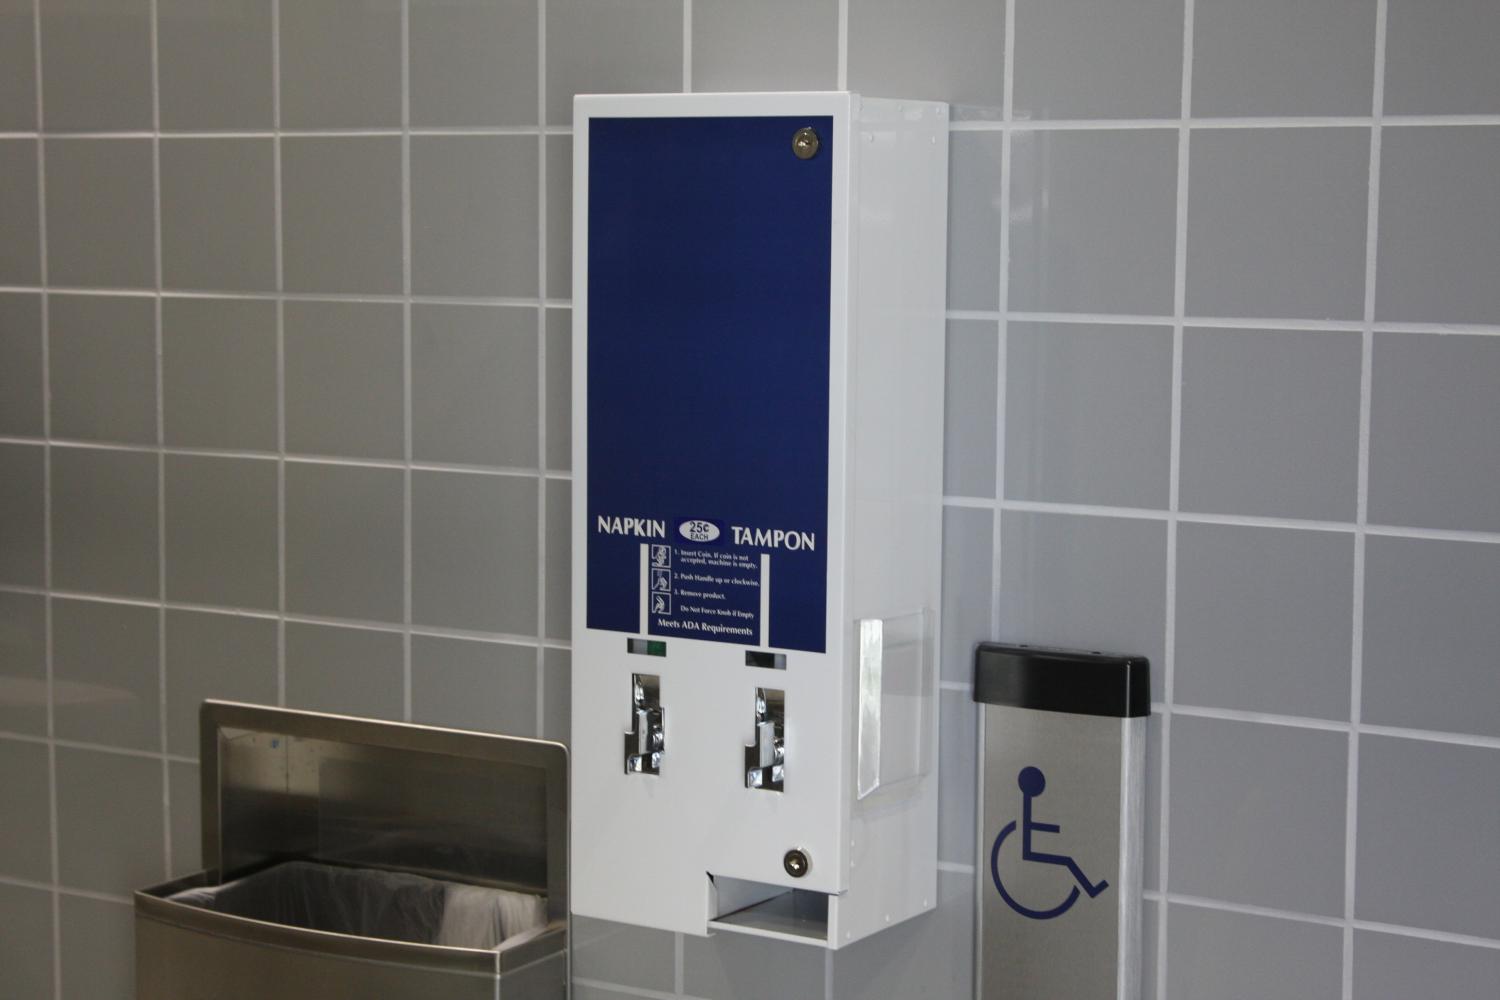 Newly installed tampon and napkin dispenser in the women's restroom of the Fine Arts Building on the second floor. All women's restroom should have dispensers according to Vice President of Student Services Dr. Stephen B. Johnson. Photo credit: David Jenkins